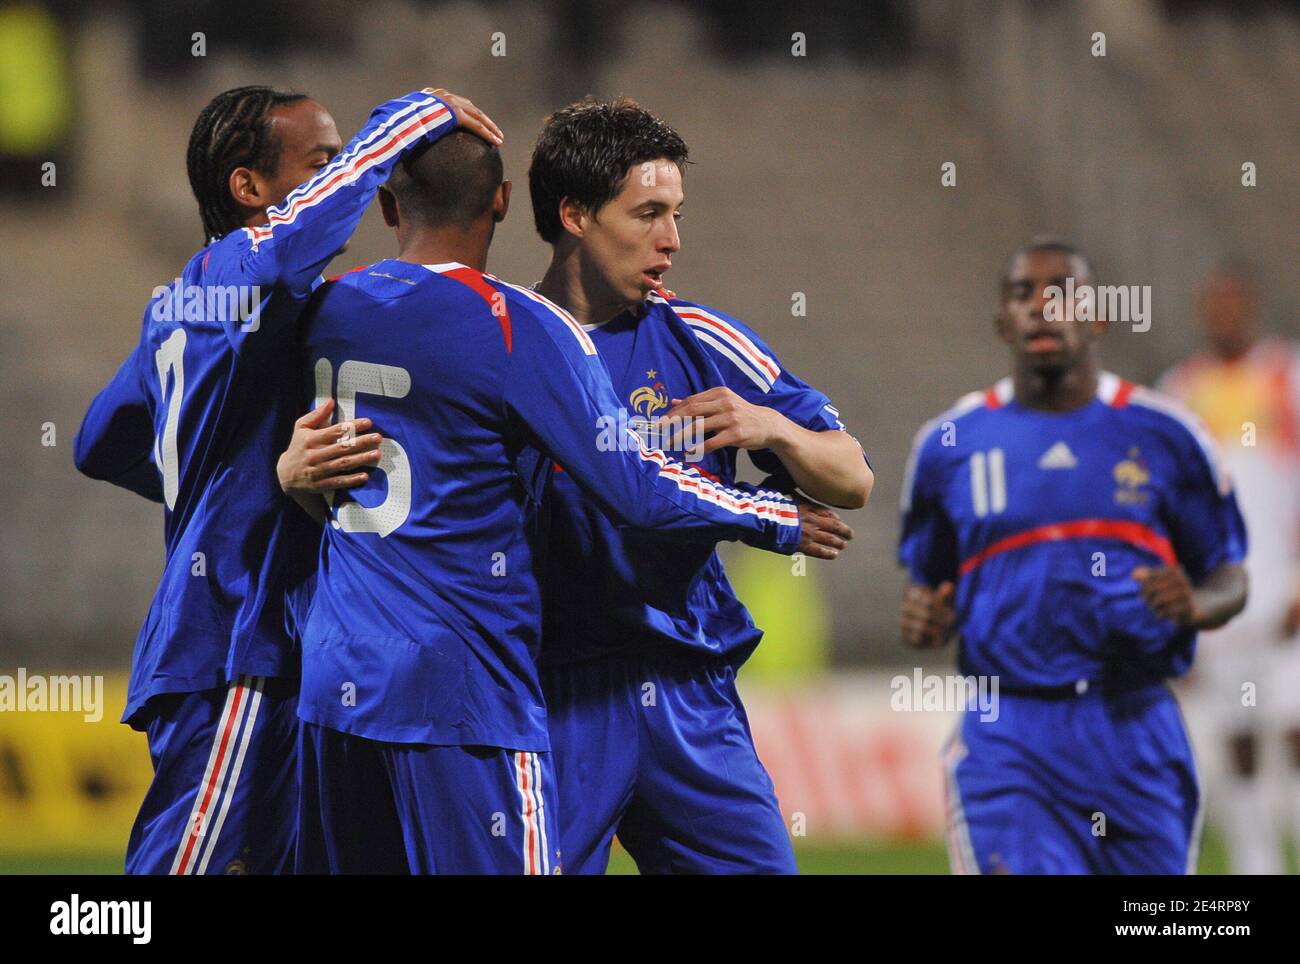 (L-R) France's Jimmy Briand, Florent Sinama Pongolle, Samir Nasri and Rio Antonio Mavuba celebrate the first goal during the friendly soccer match, France A' vs Mali at the Charlety stadium in Paris, France on March 25, 2008. France defeats Mali 3-2. Photo by Steeve McMay/Cameleon/ABACAPRESS.COM Stock Photo